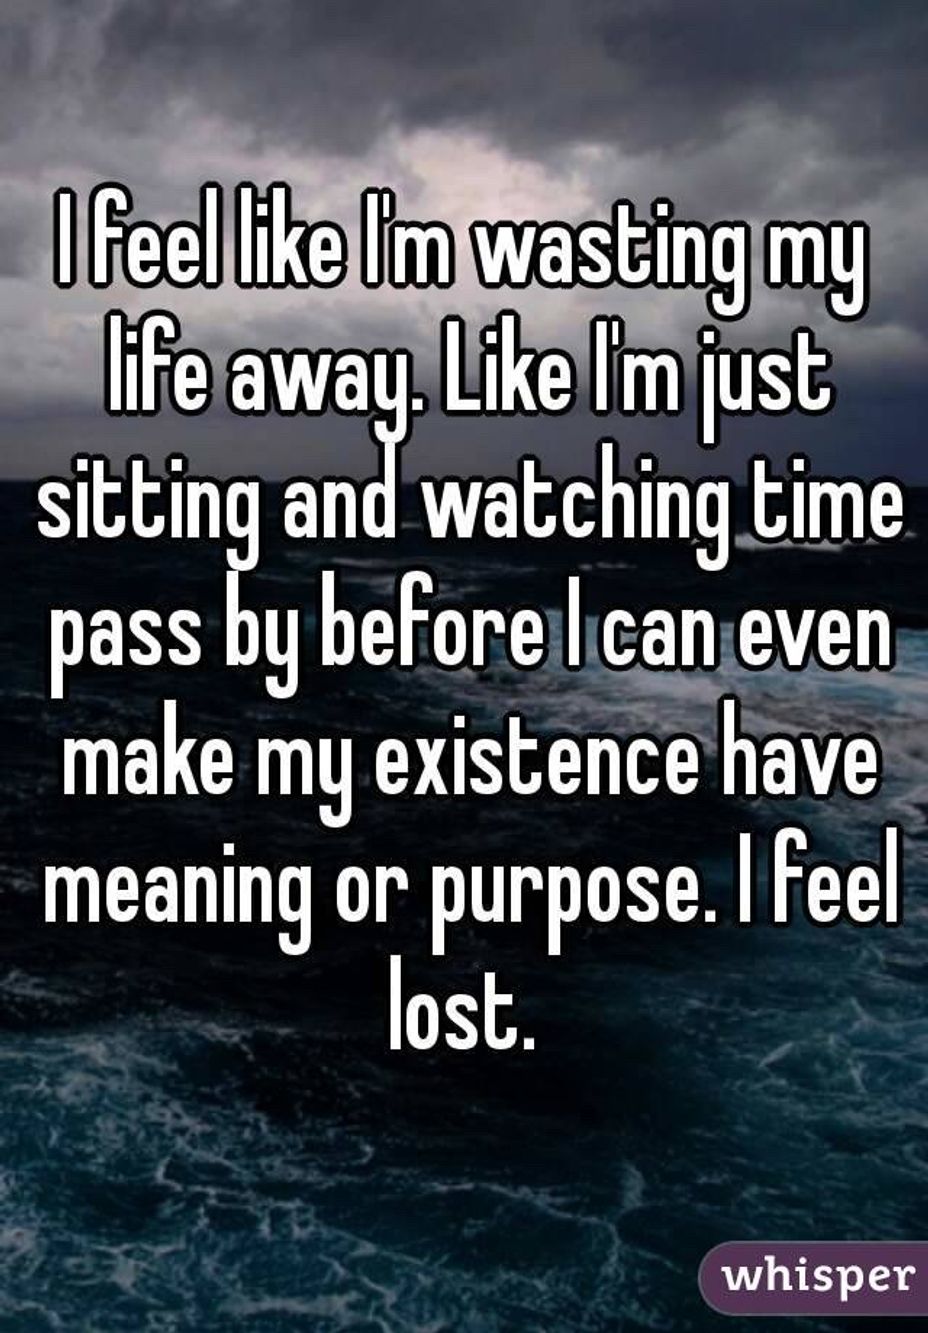 <p>I just want to feel I have a Purpose in this world besides being a Mother & Wife 😢😢</p>